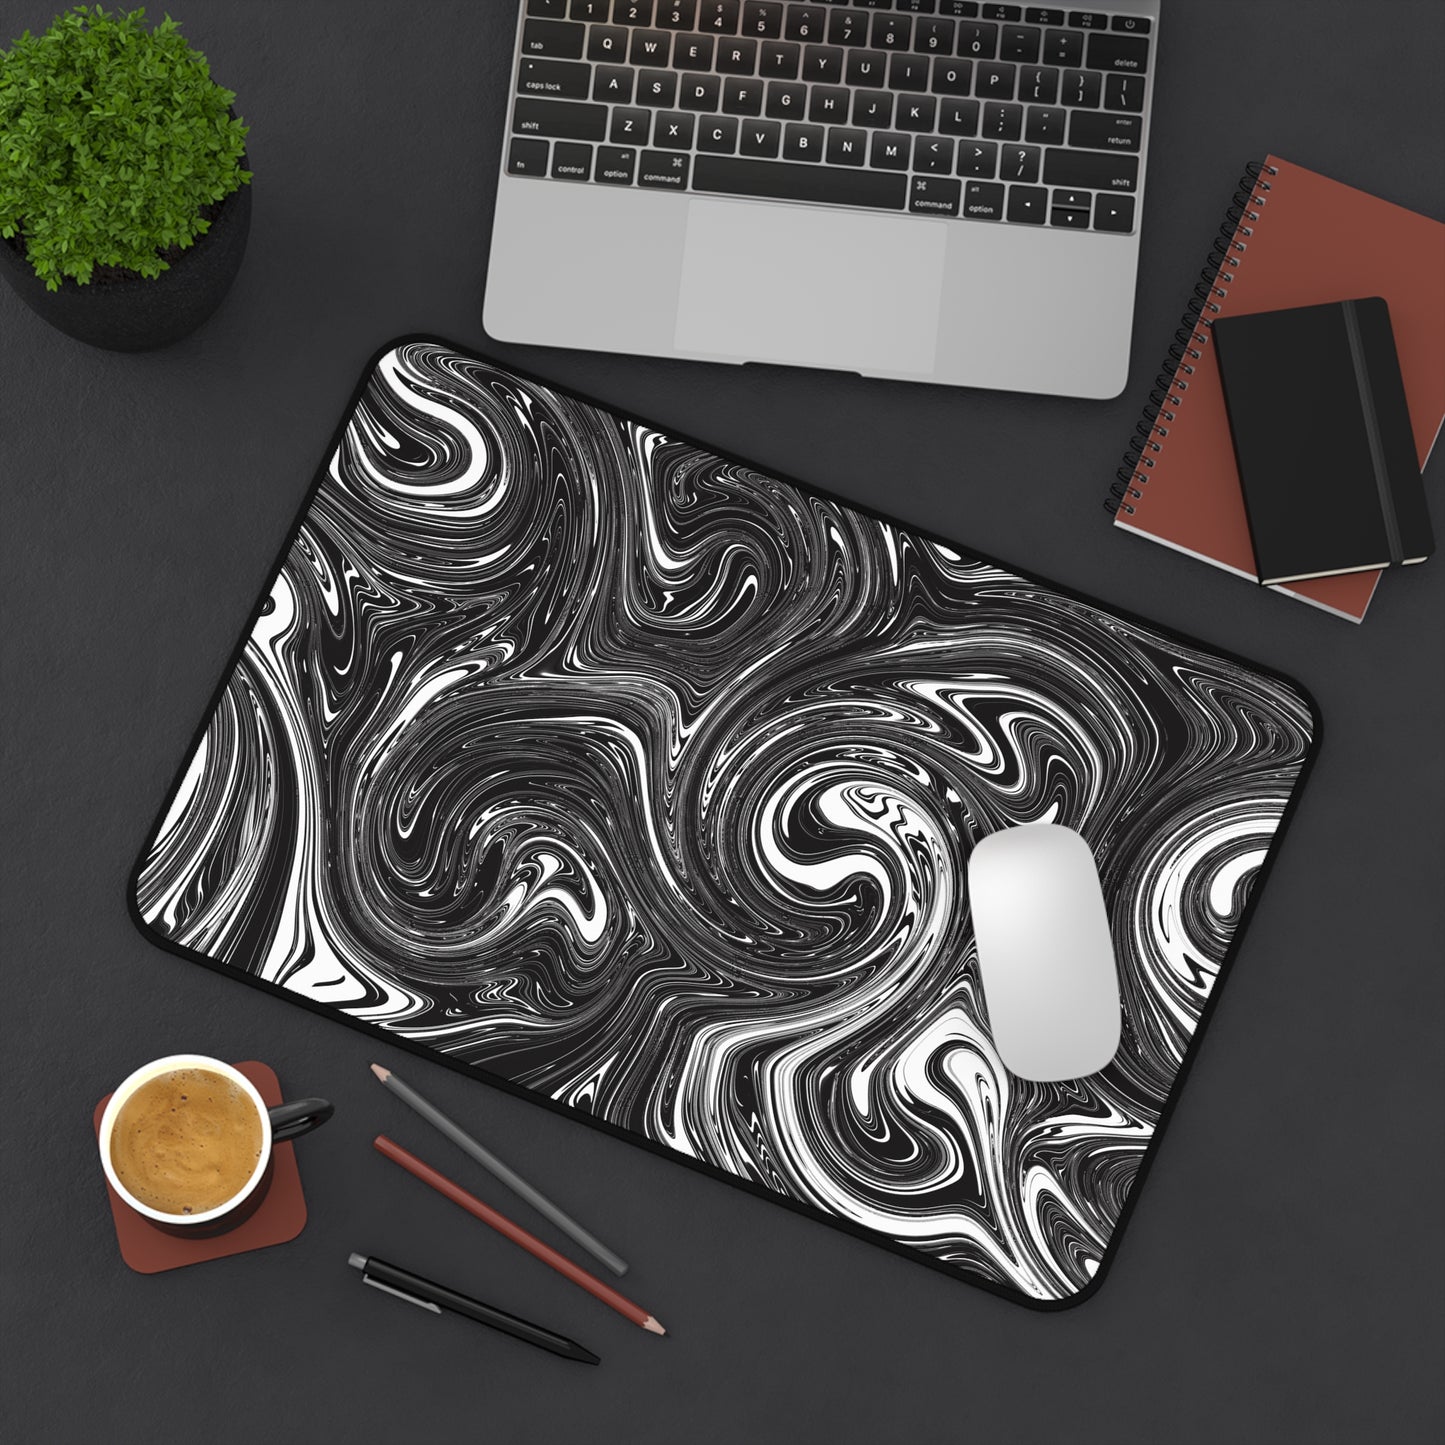 A 12" x 18" desk mat with black and white swirls sitting at an angle.